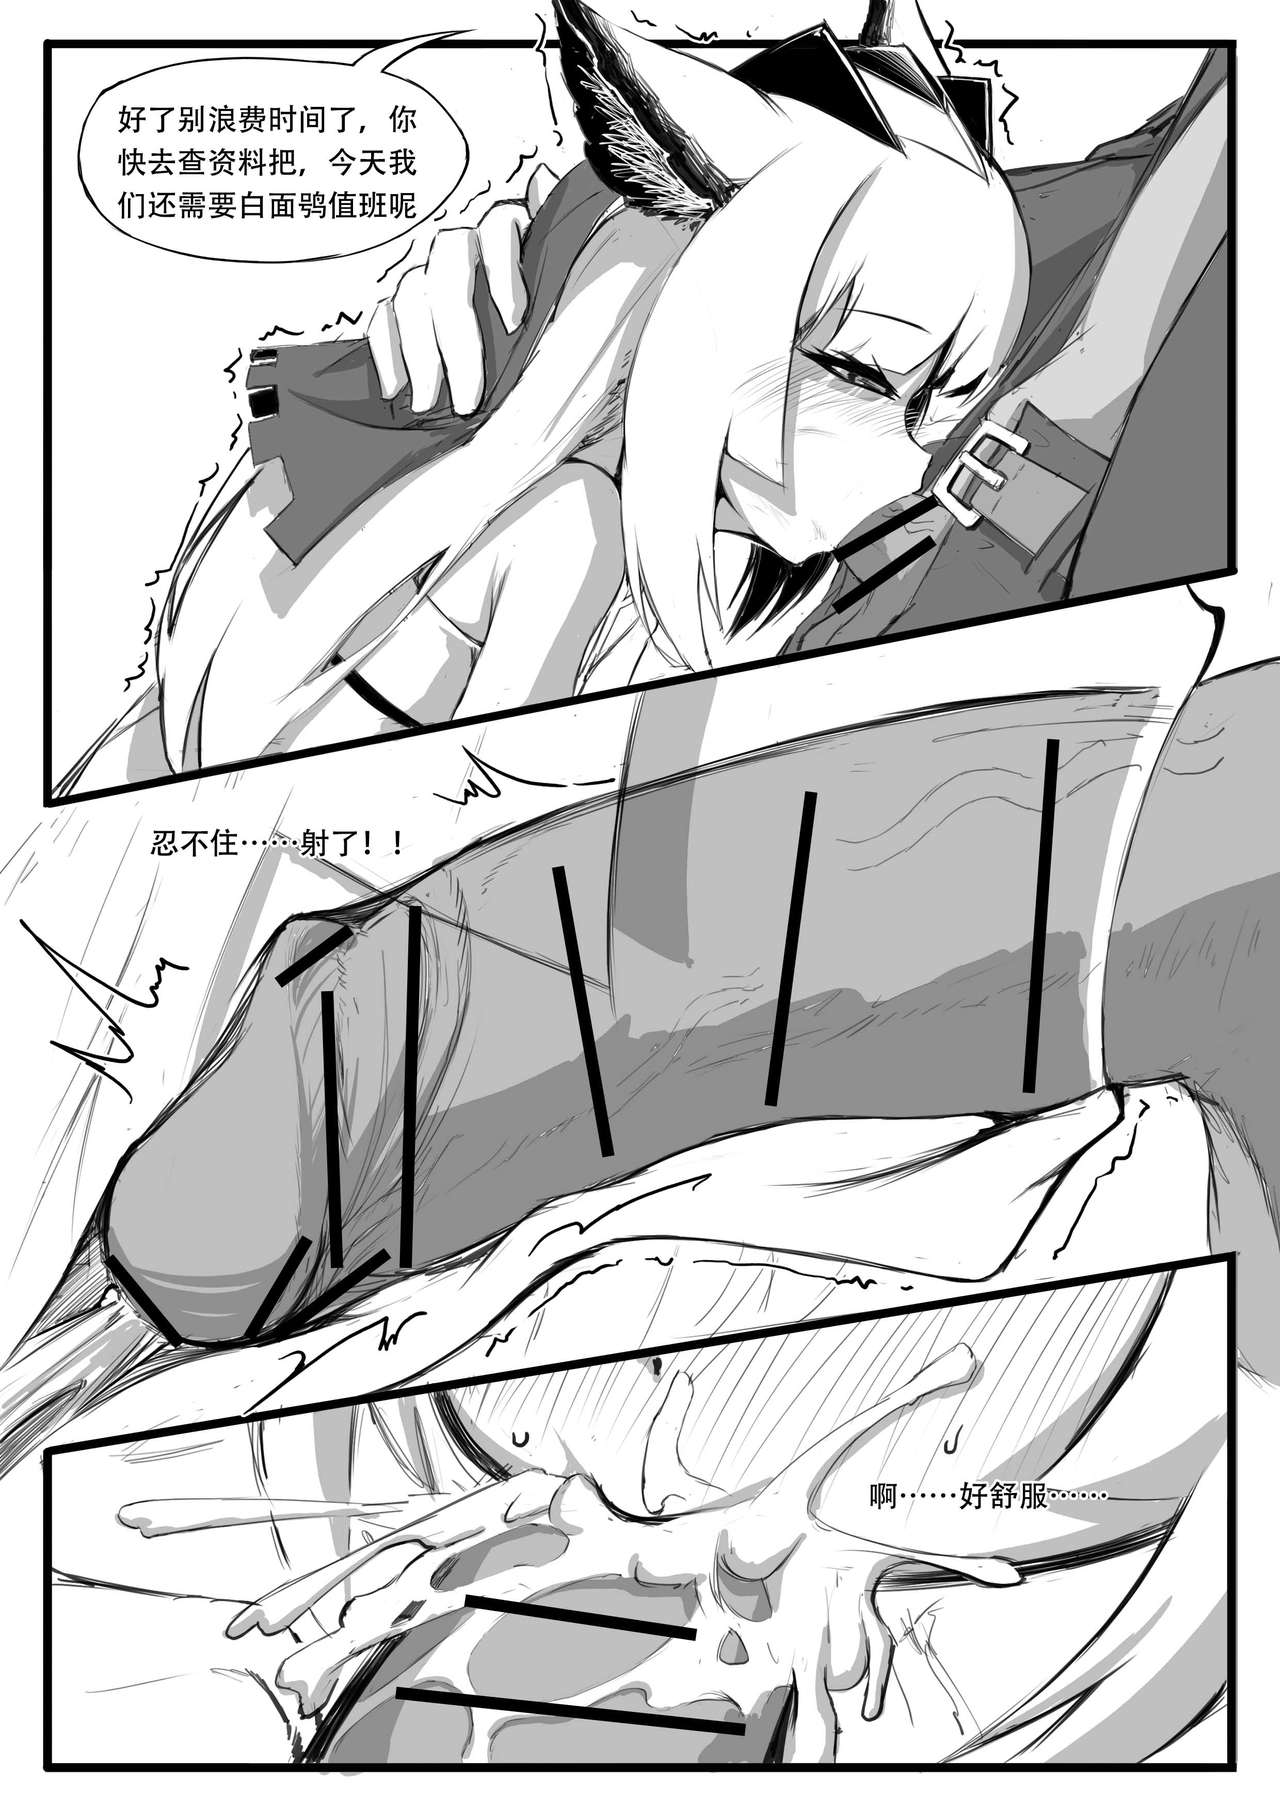 [saluky] 关于白面鸮变成了幼女这件事 (Arknights) [Chinese] page 16 full